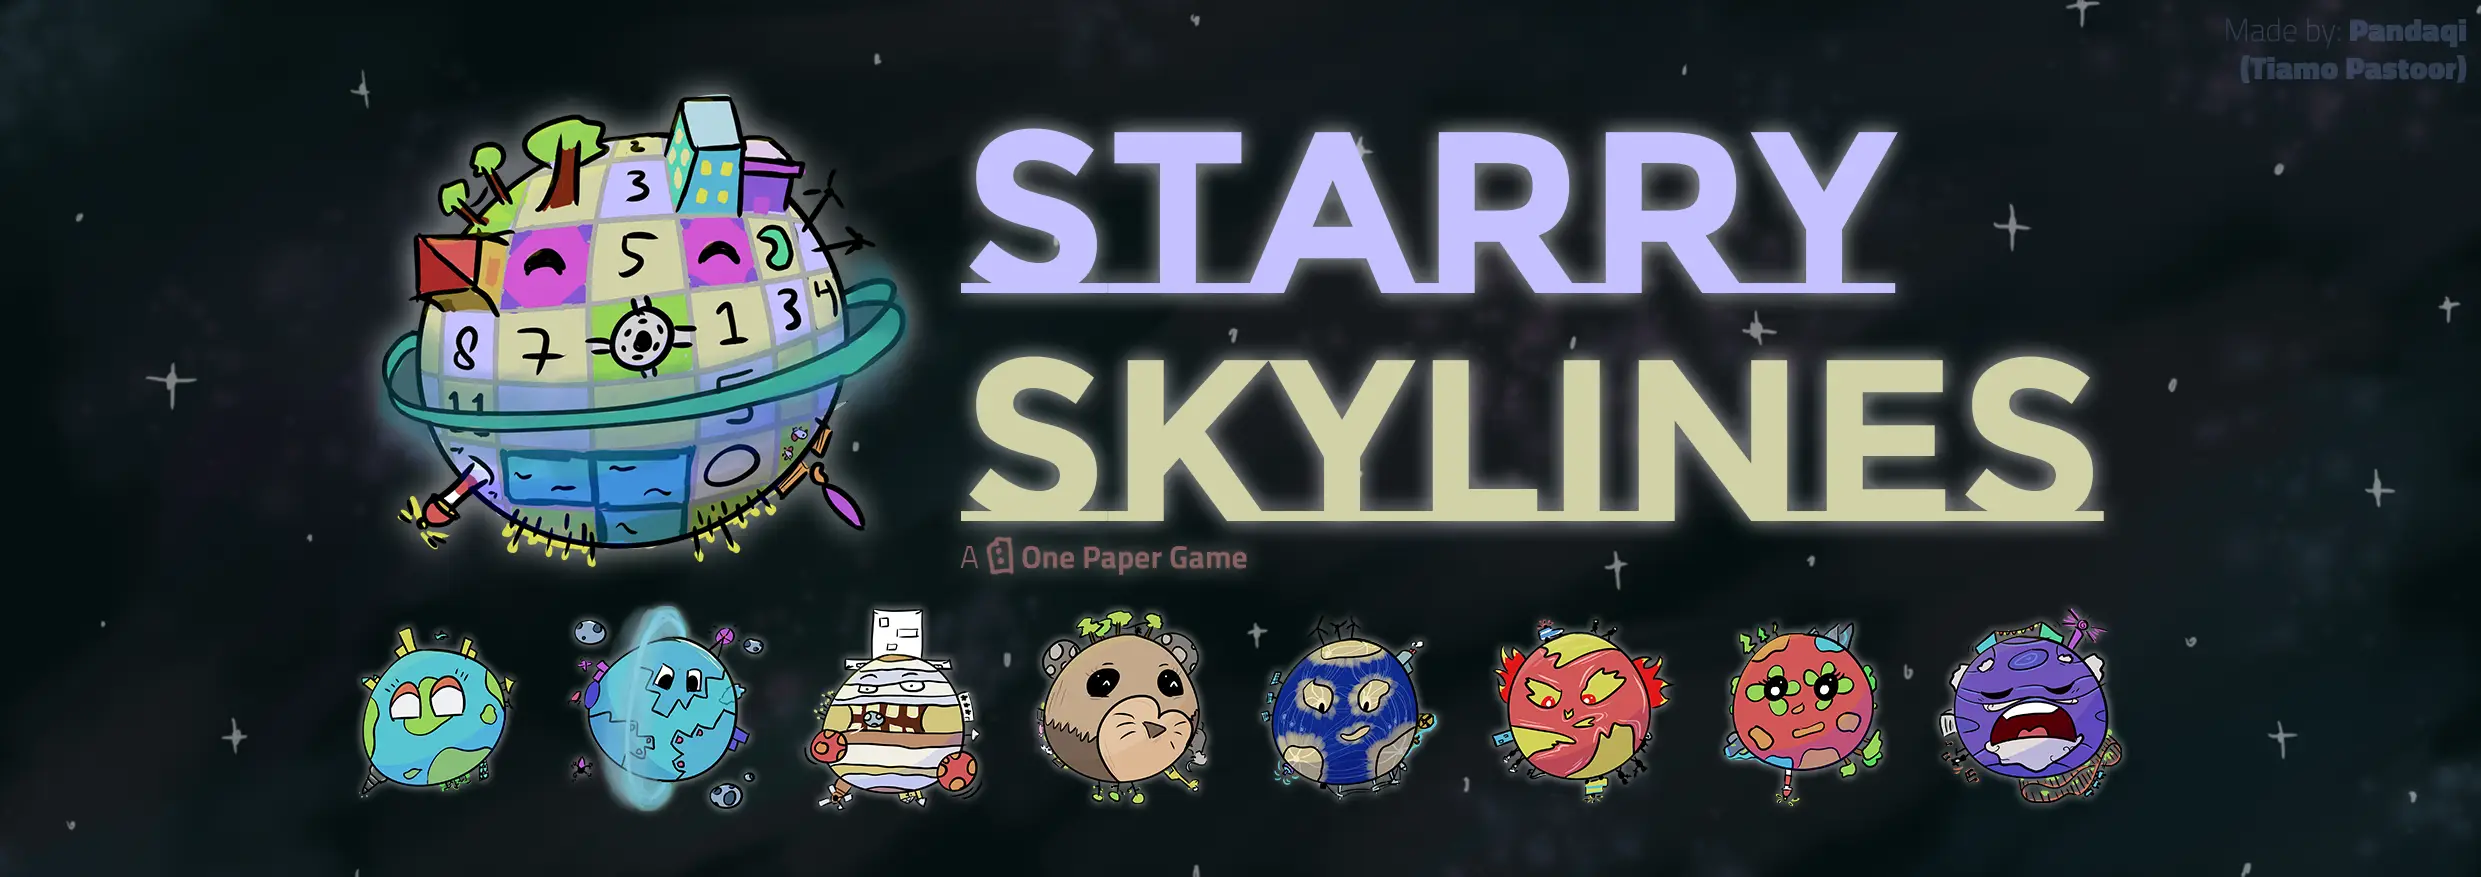 Thumbnail / Header for article: Starry Skylines